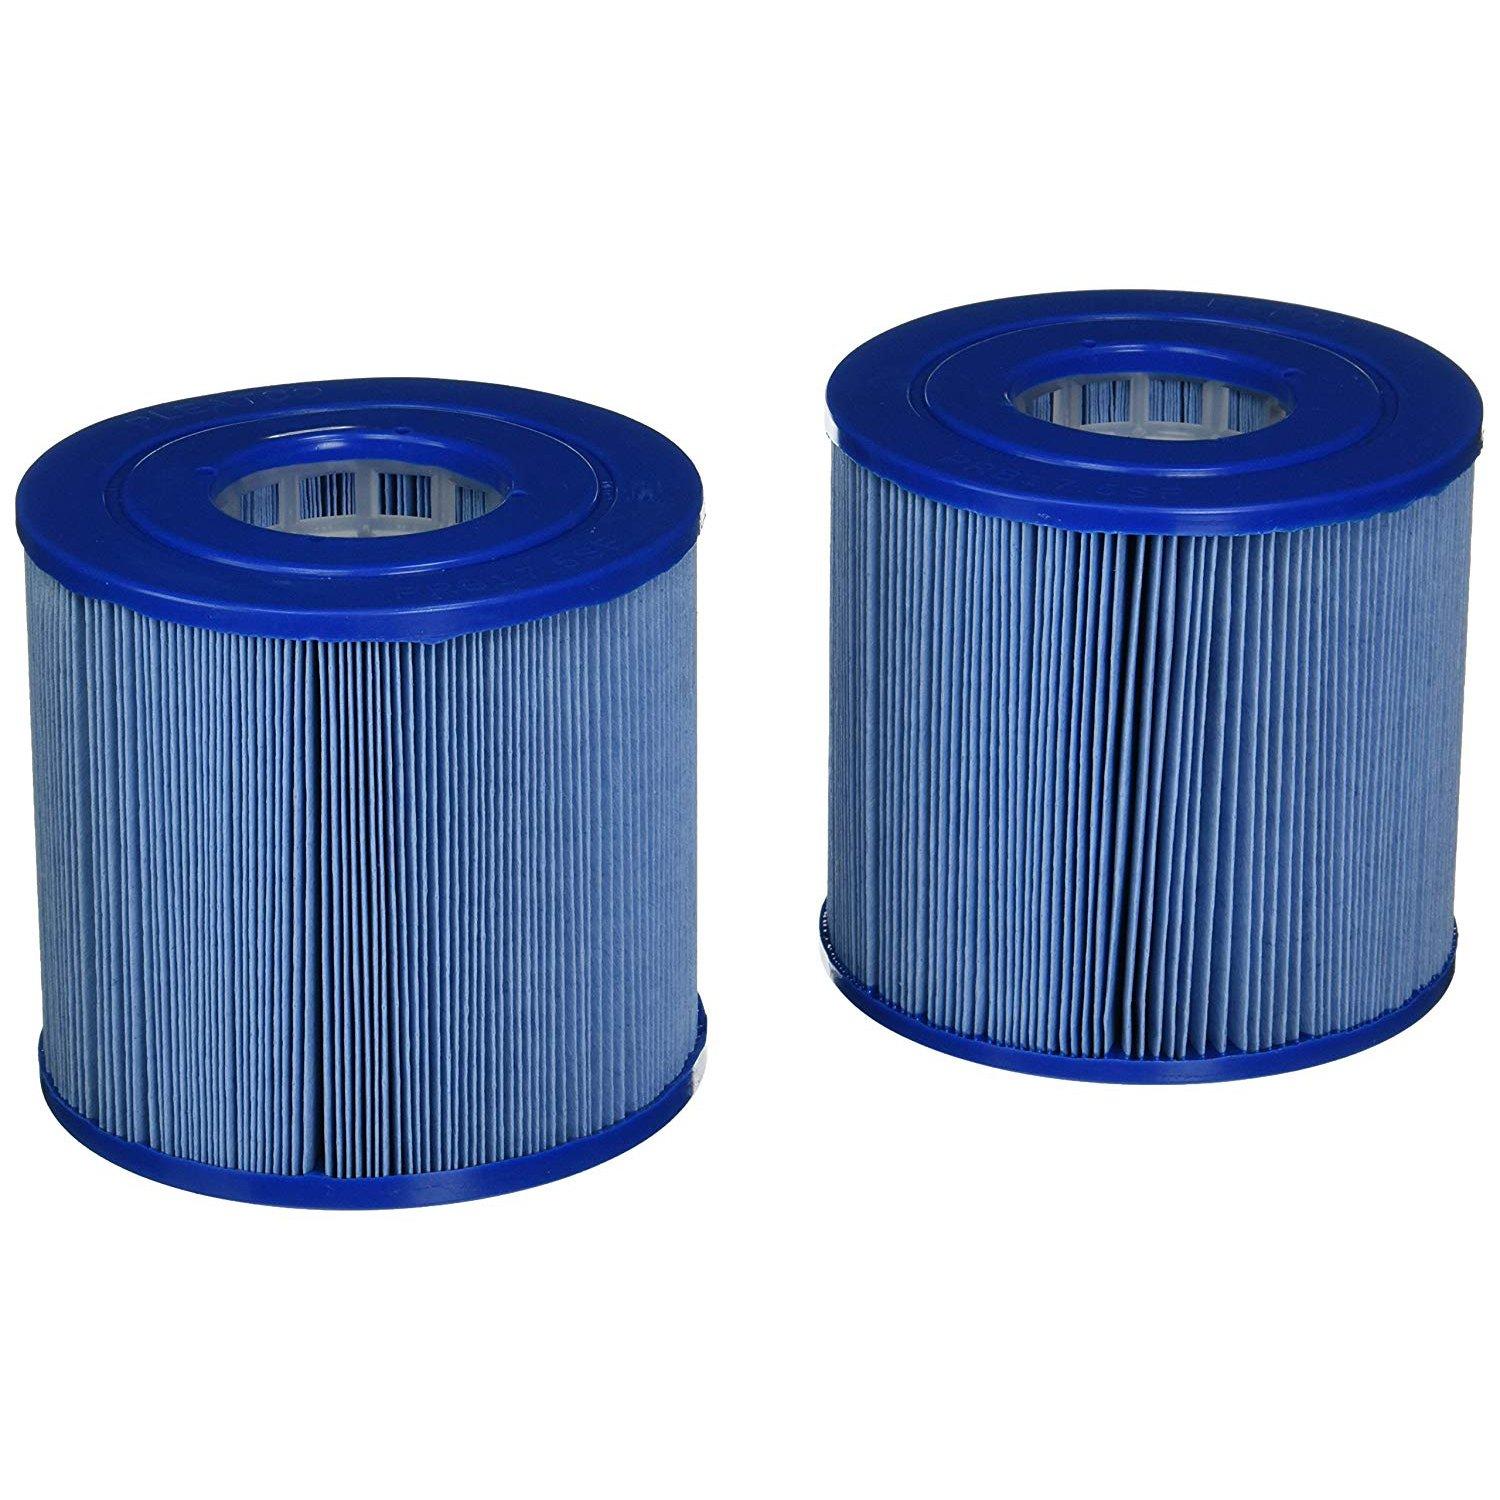 Pleatco Filter Cartridge for Dynamic Series IV Model DSF 35 Waterway Antimicrobial